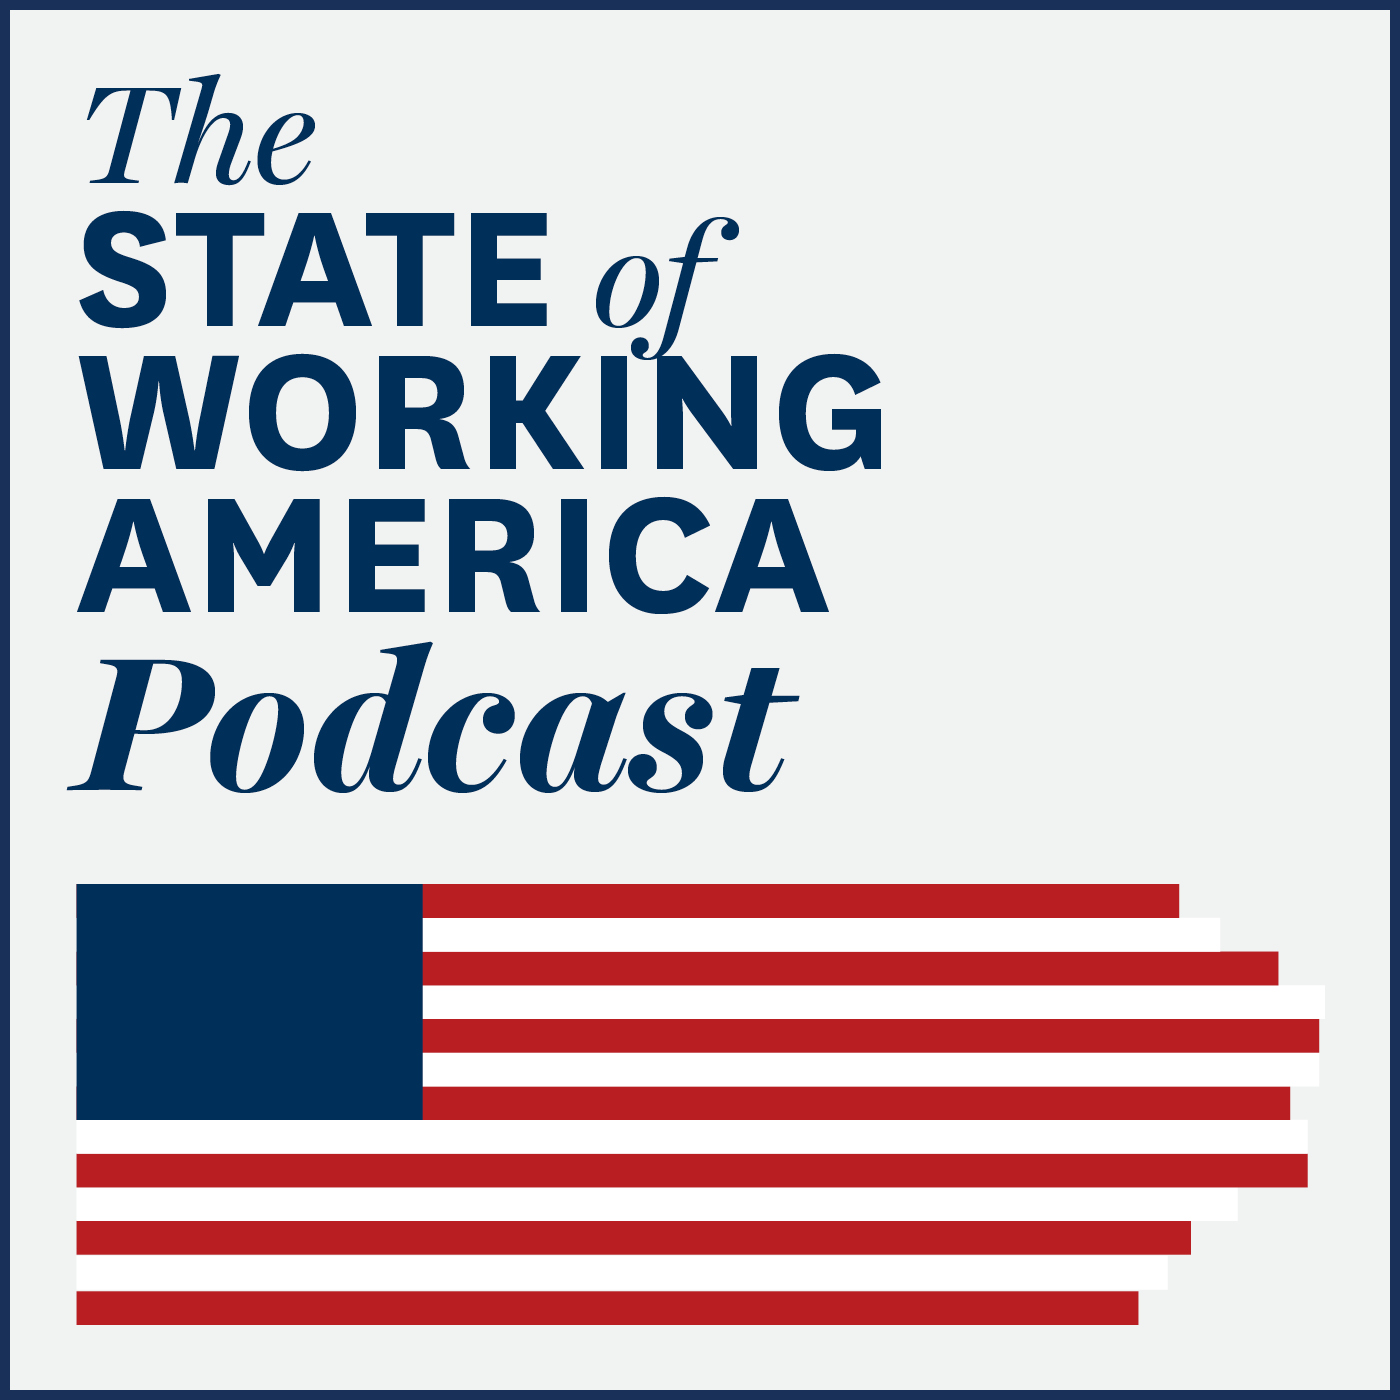 Podcast: State of Working America